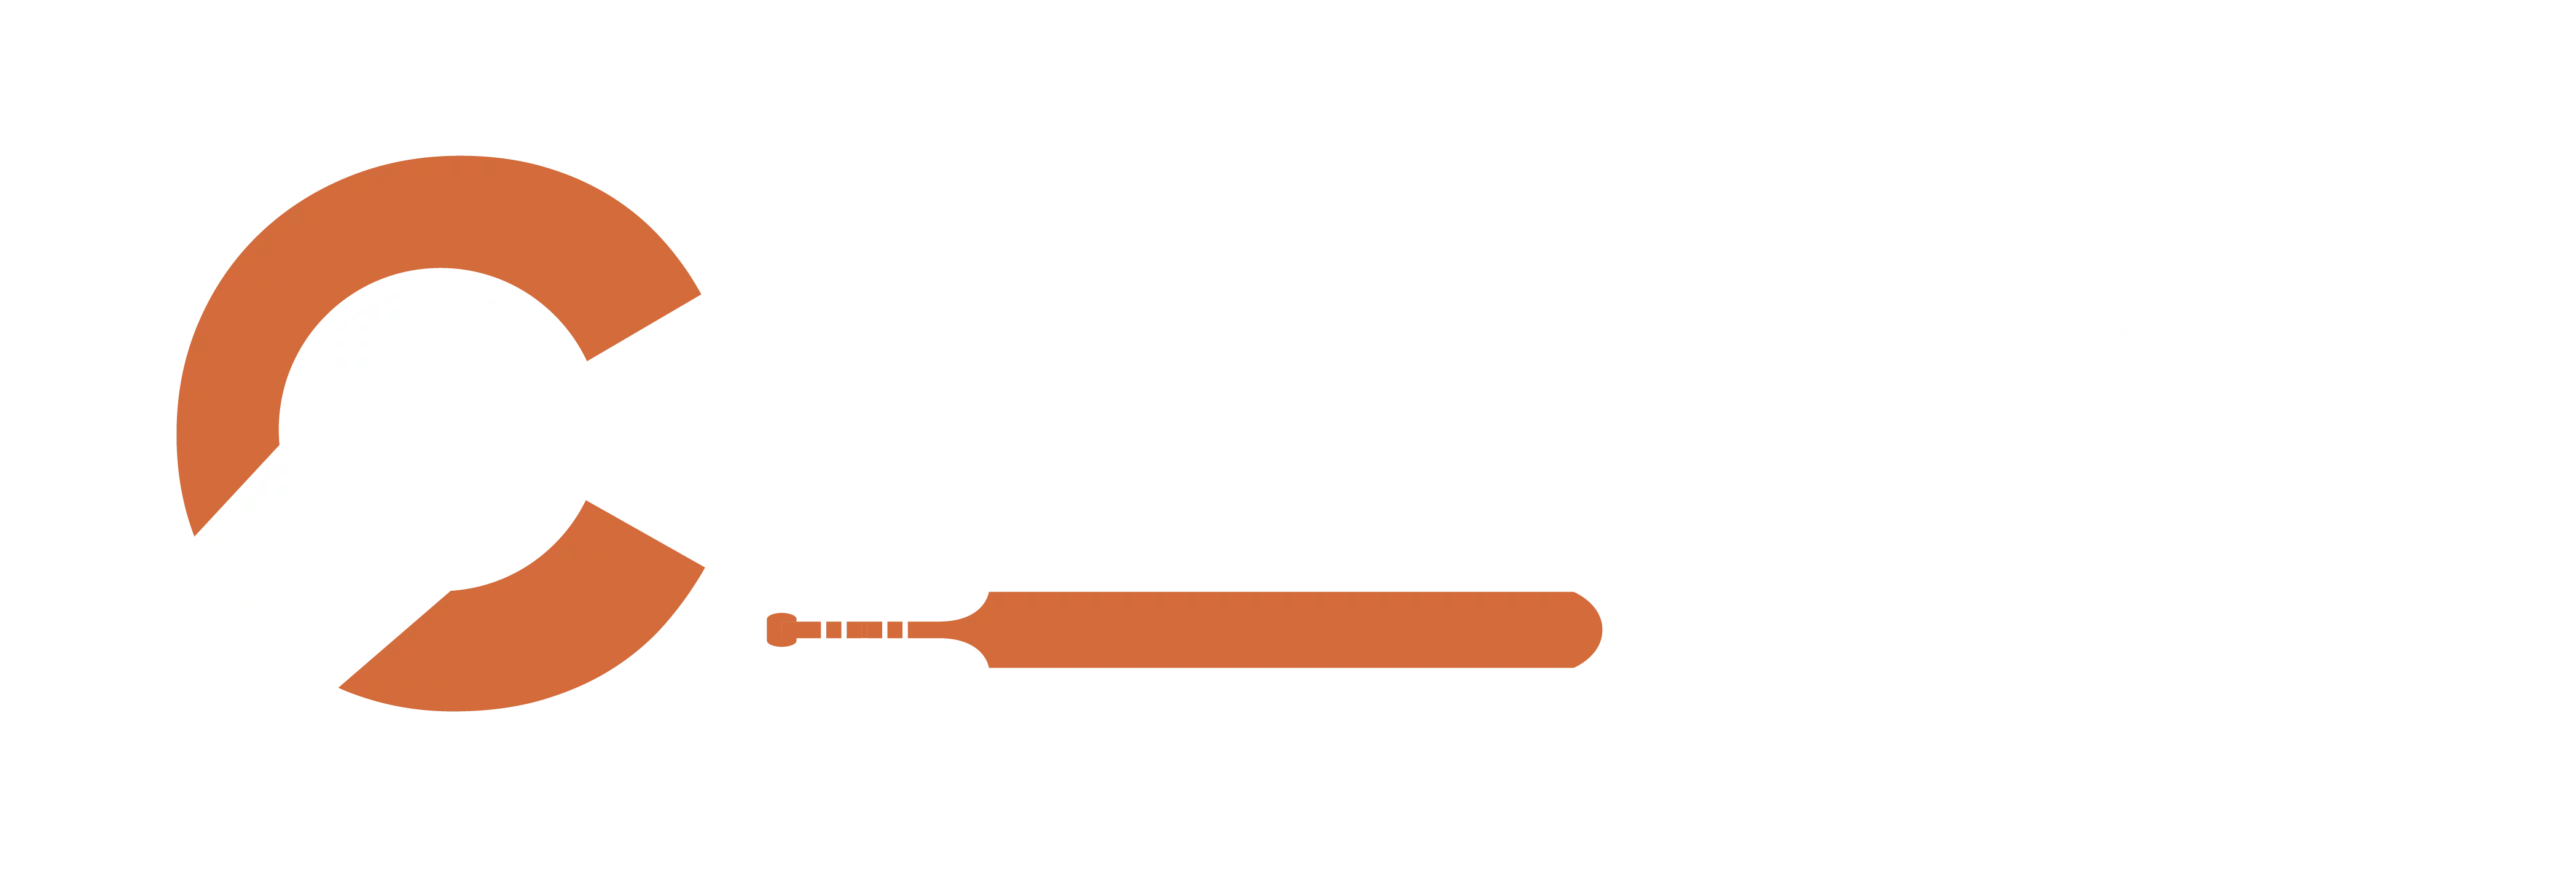 "Cricket betting expert" is a specialized site about cricket betting in India, the intricacies of bets on it, odds, championships, and more.